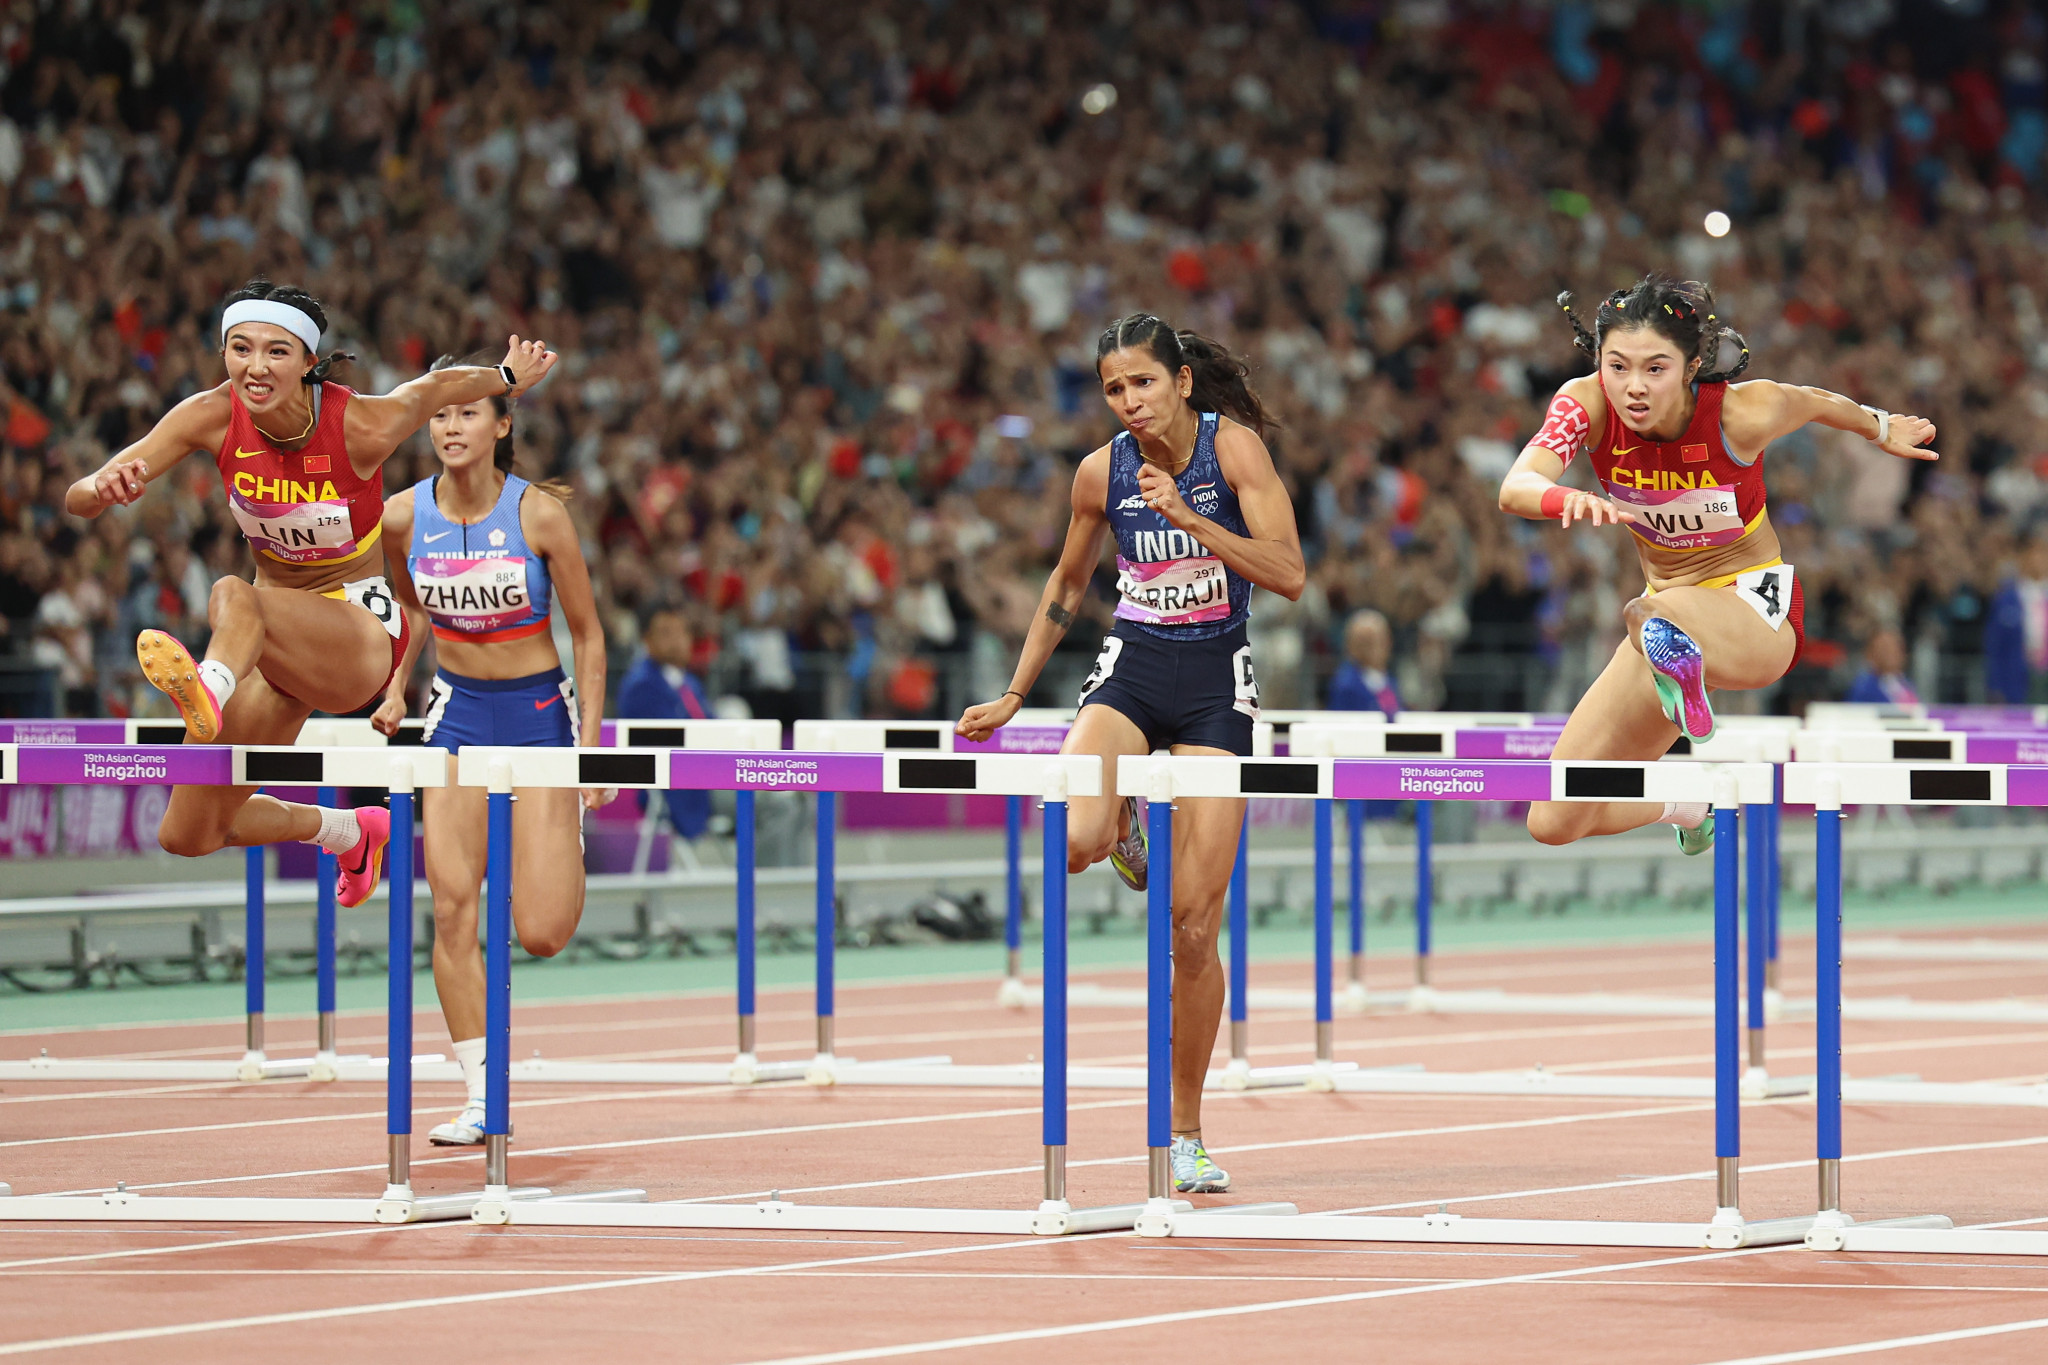 China's Lin Yuwei, left, claimed the women's 100m hurdles title ahead of India's Jyothi Yarraji, centre, and fellow Chinese sprinter Wu Yanni, right ©Getty Images